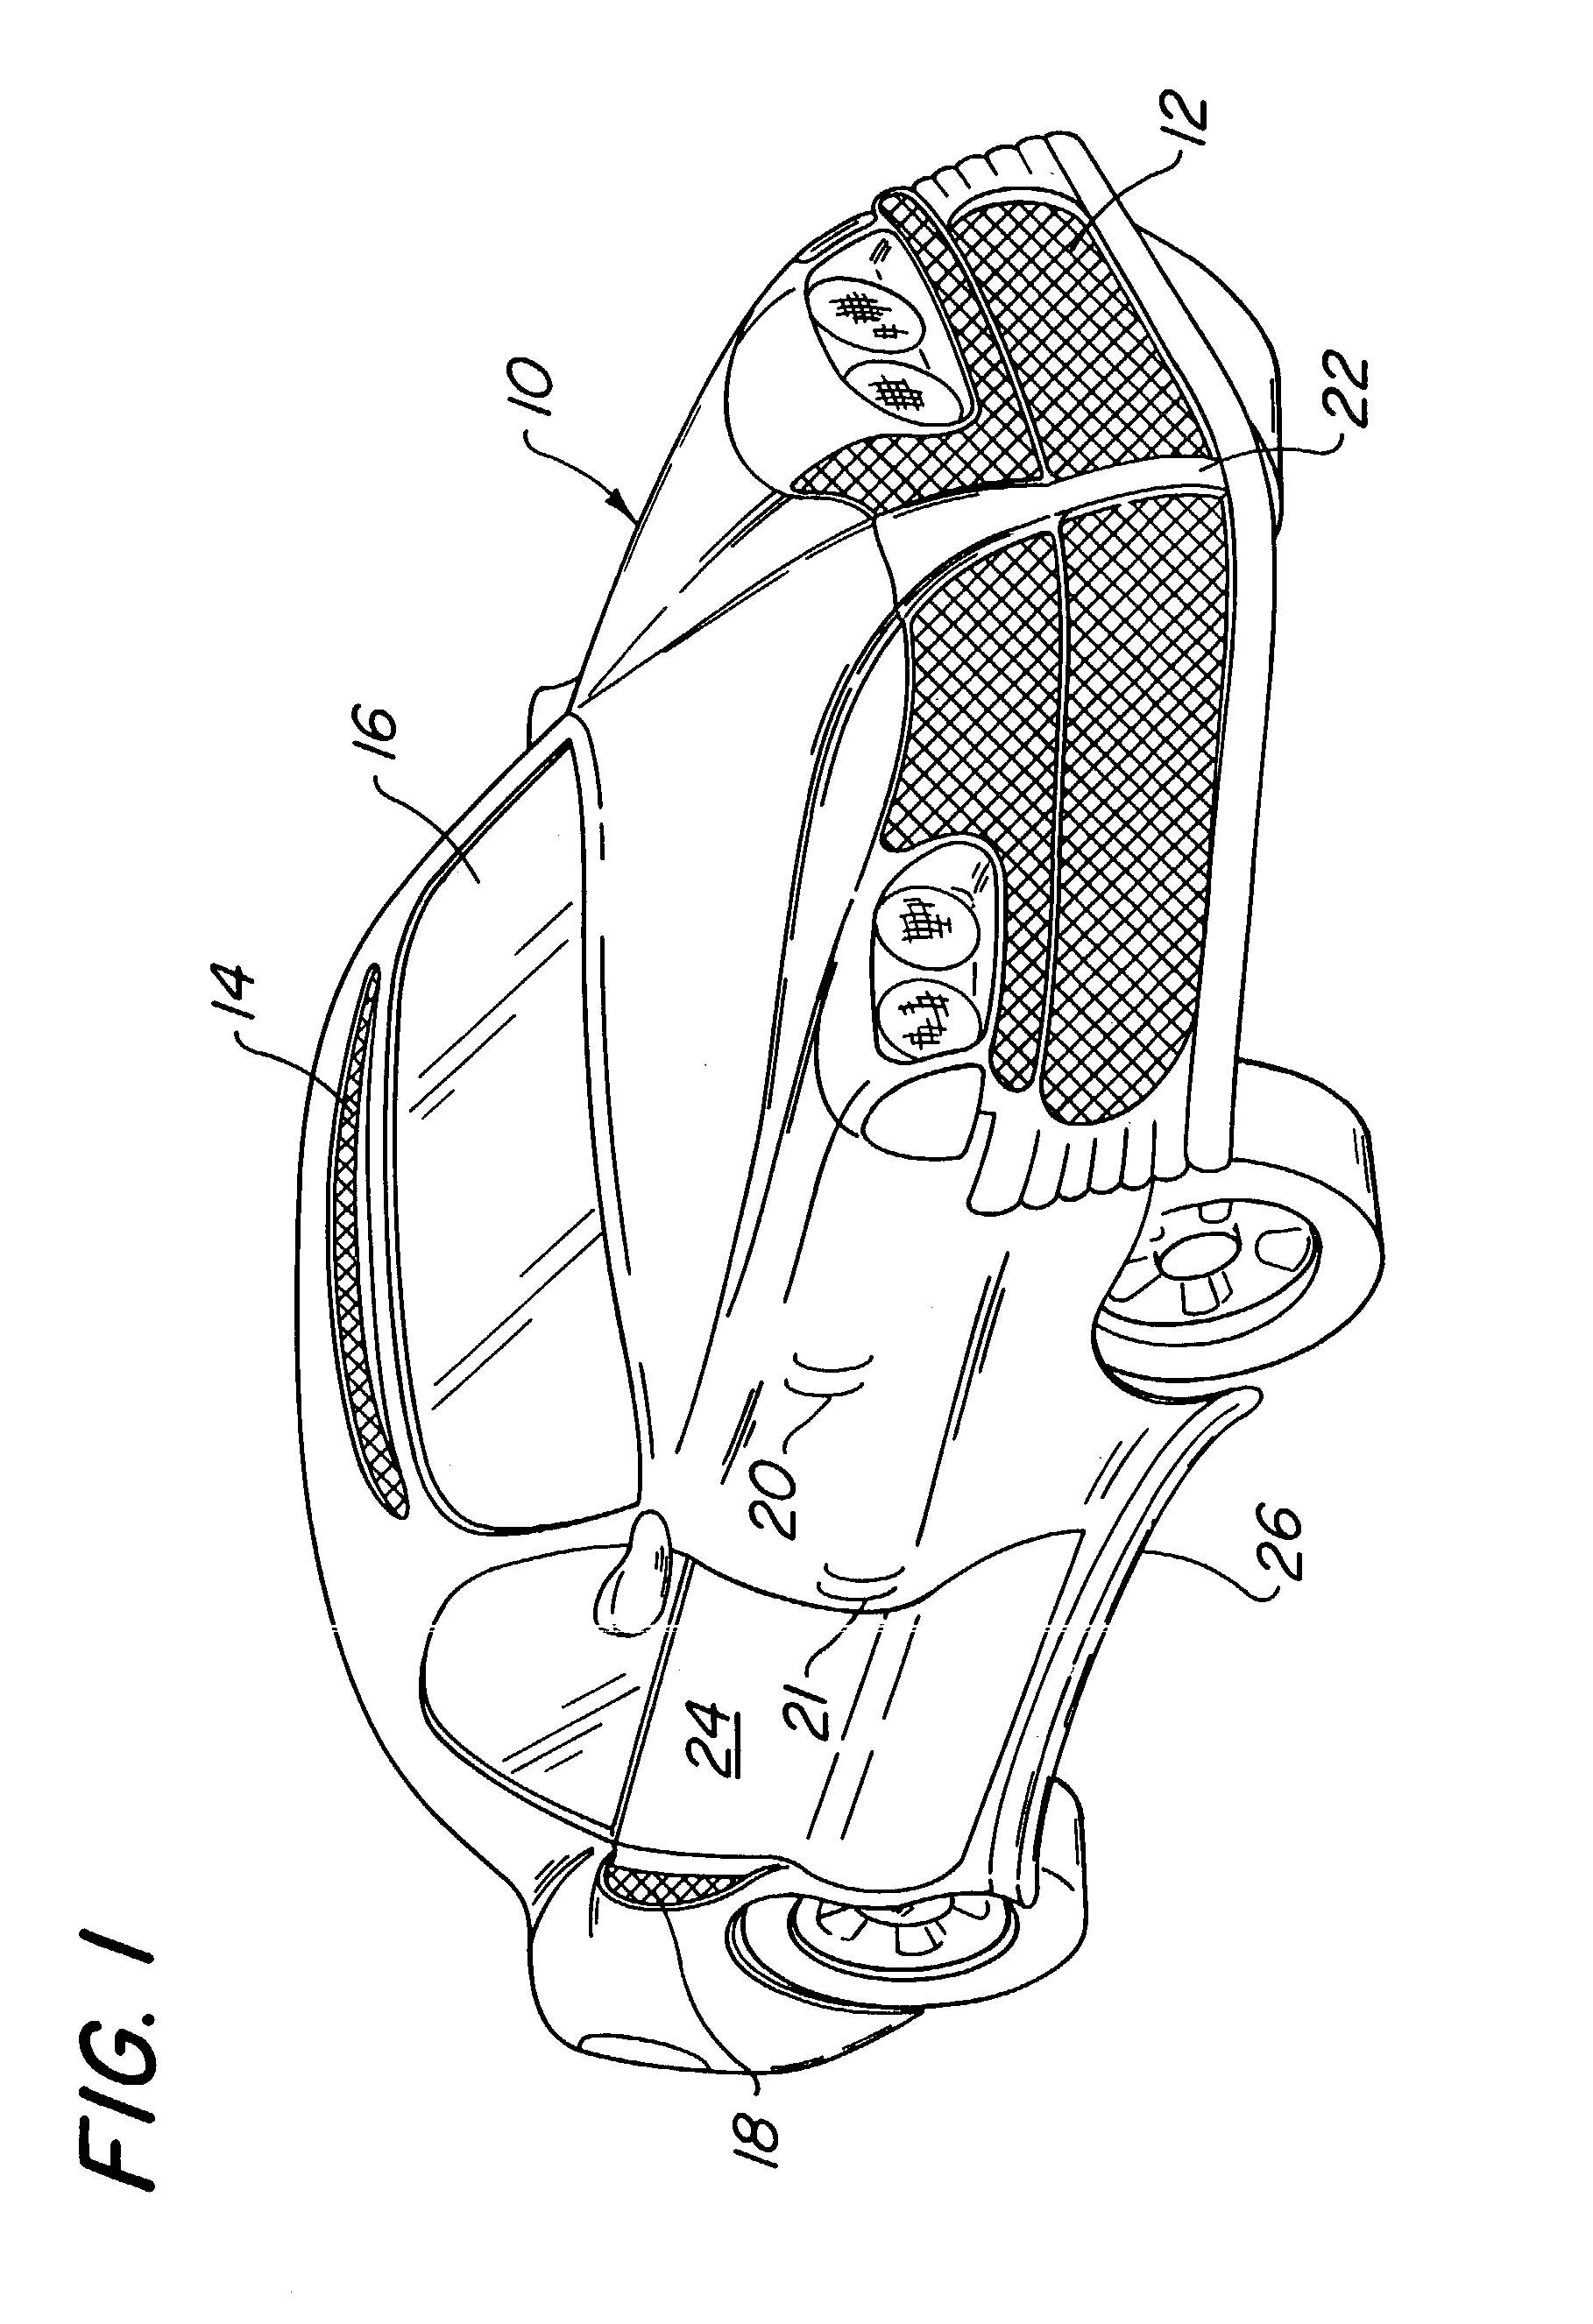 Airflow driven electrical generator for a moving vehicle